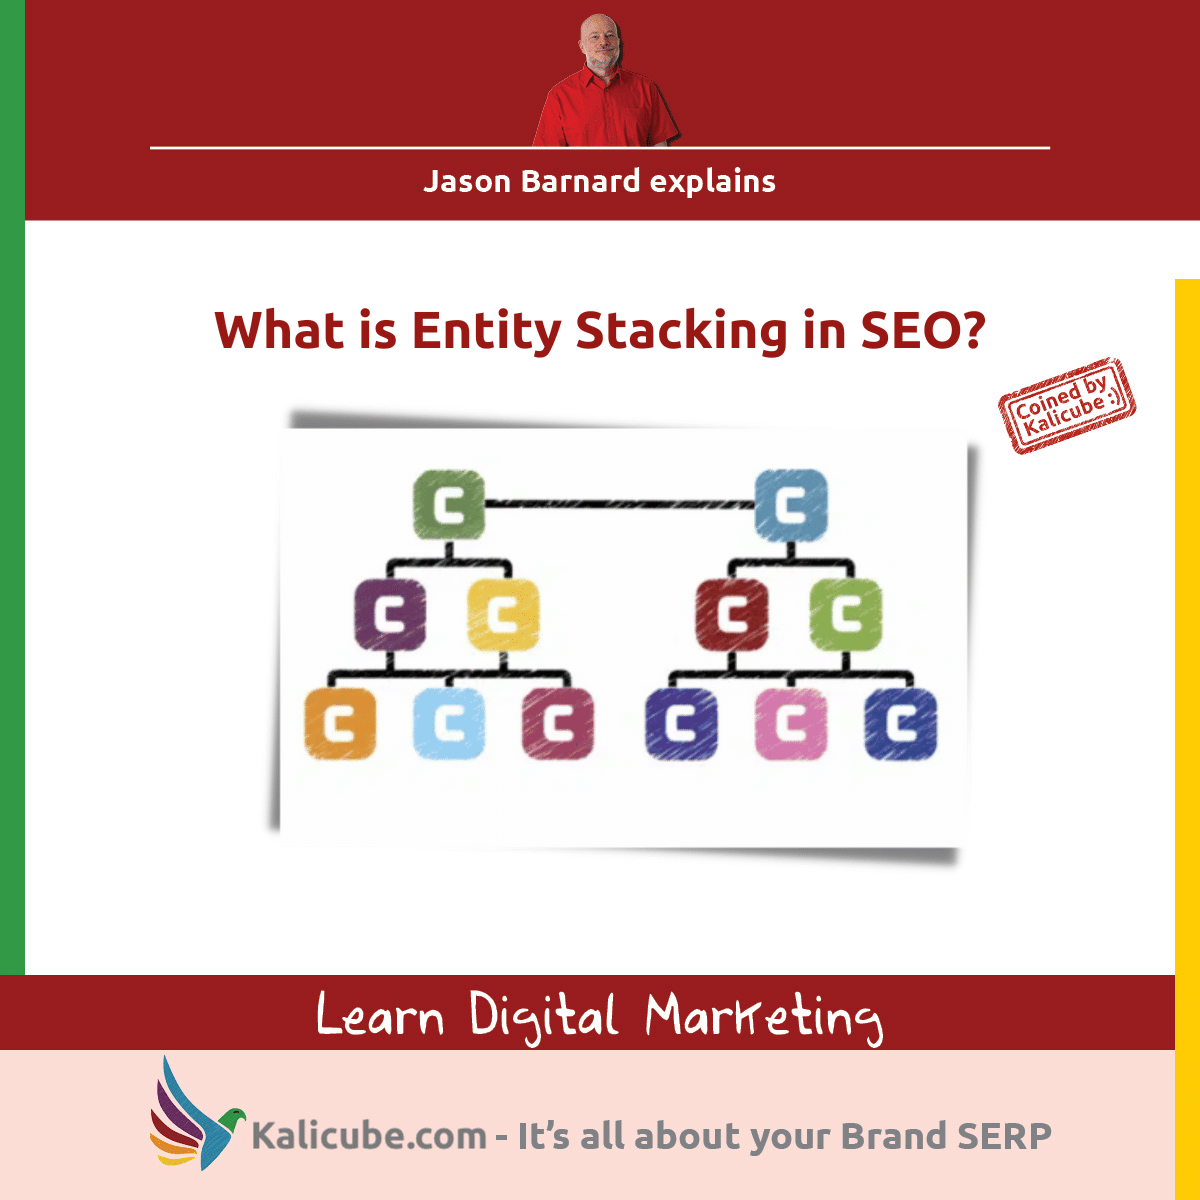 Entity Stacking in SEO